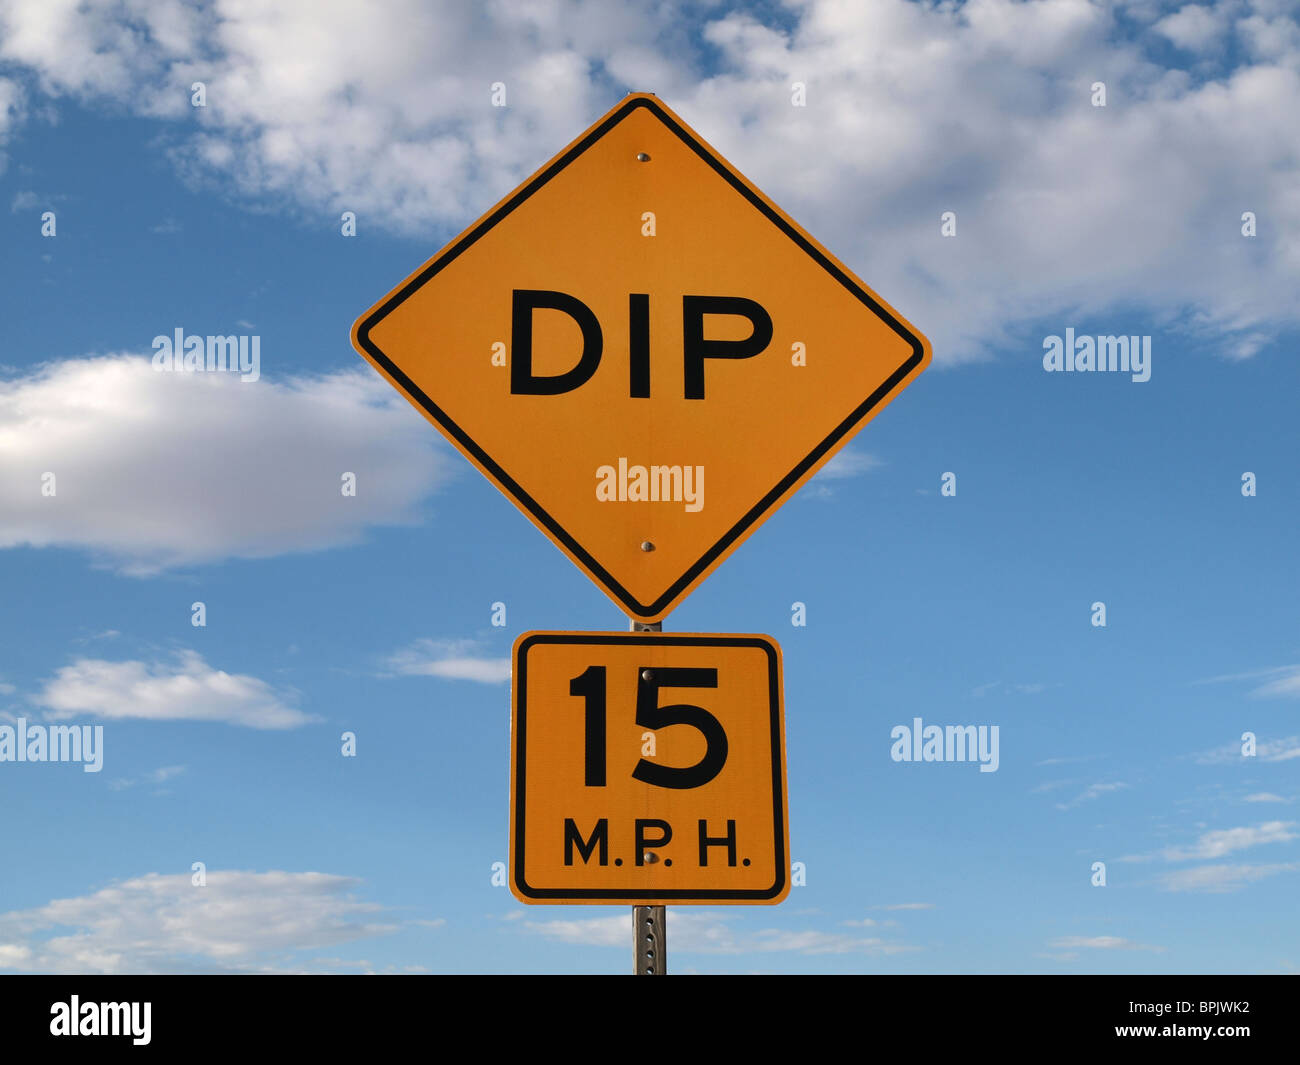 Dip ahead caution sign with a bight blue sky. Stock Photo